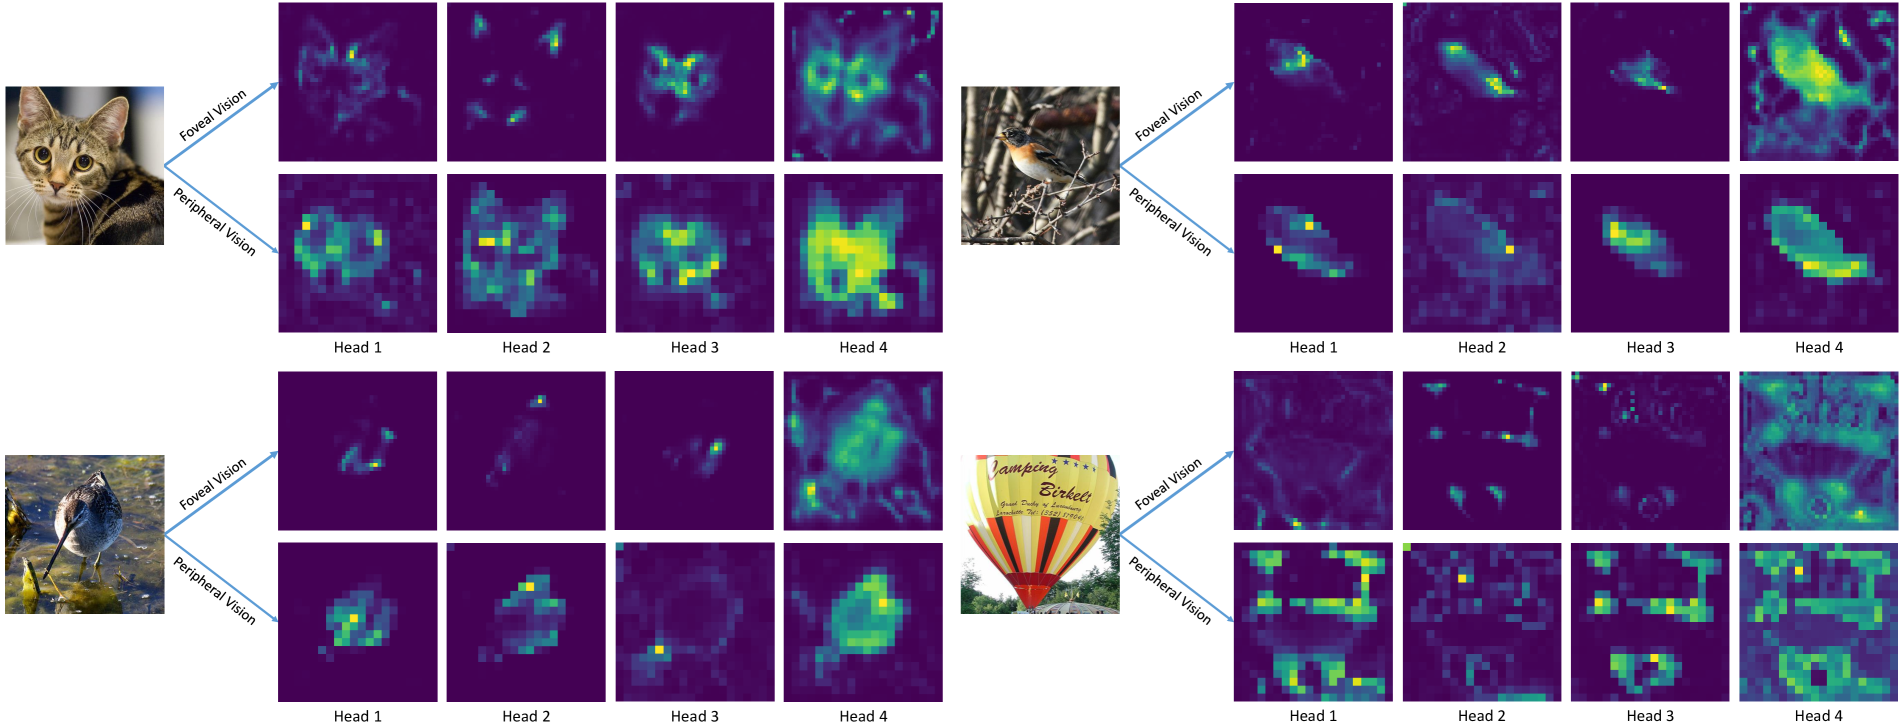 TransNeXt: Robust Foveal Visual Perception for Vision Transformers